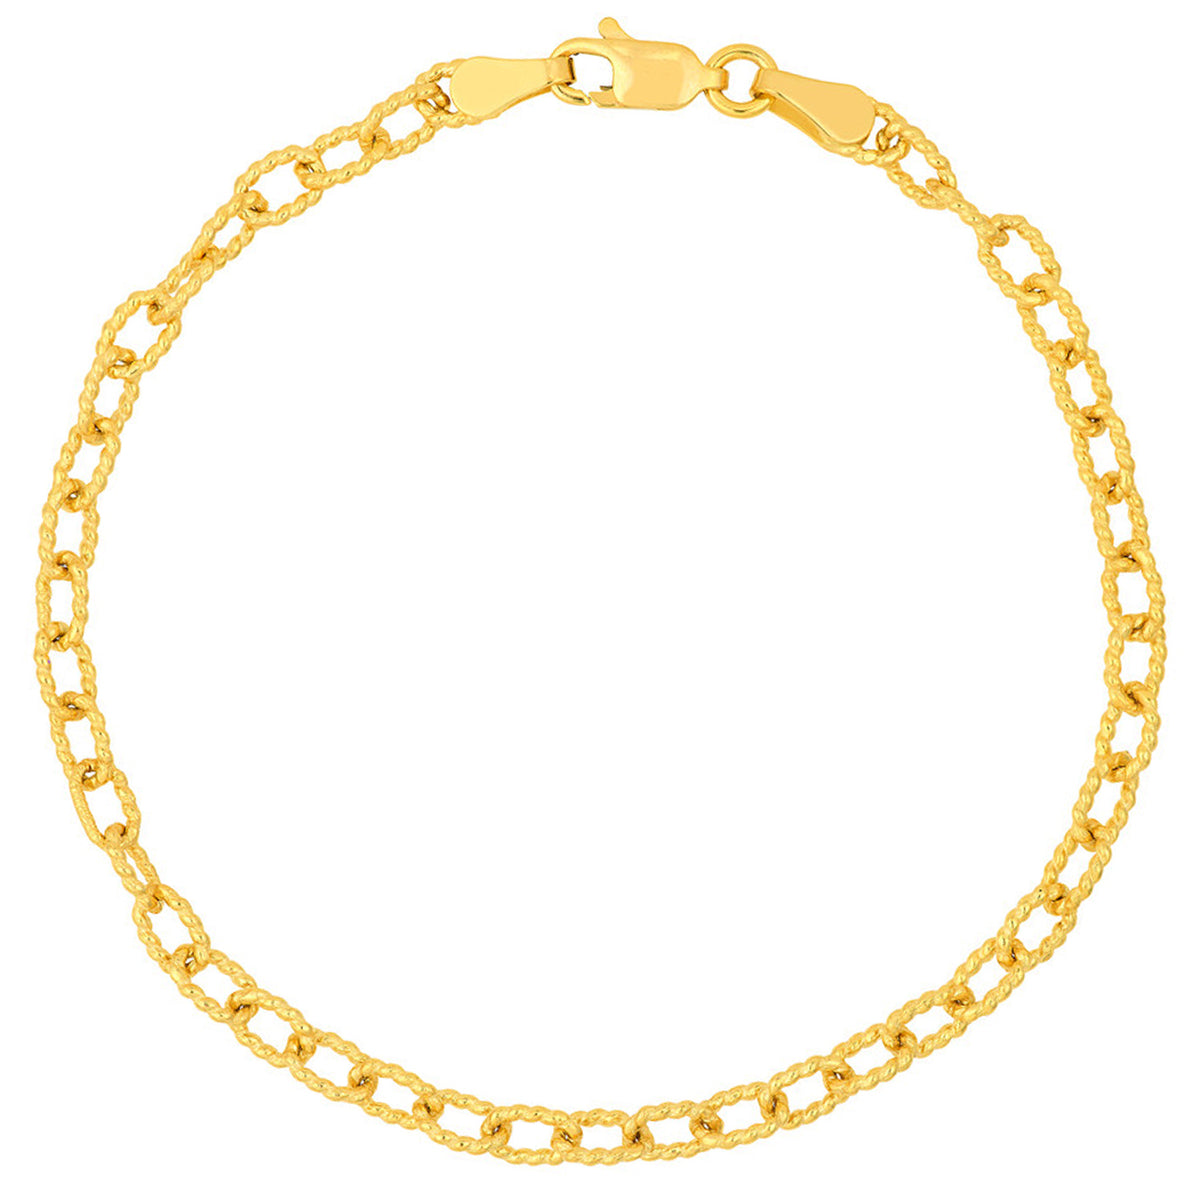 14K Yellow Gold Twisted Forzentina Chain Textured Paperclip Bracelet with Lobster Lock, 7.5 inches